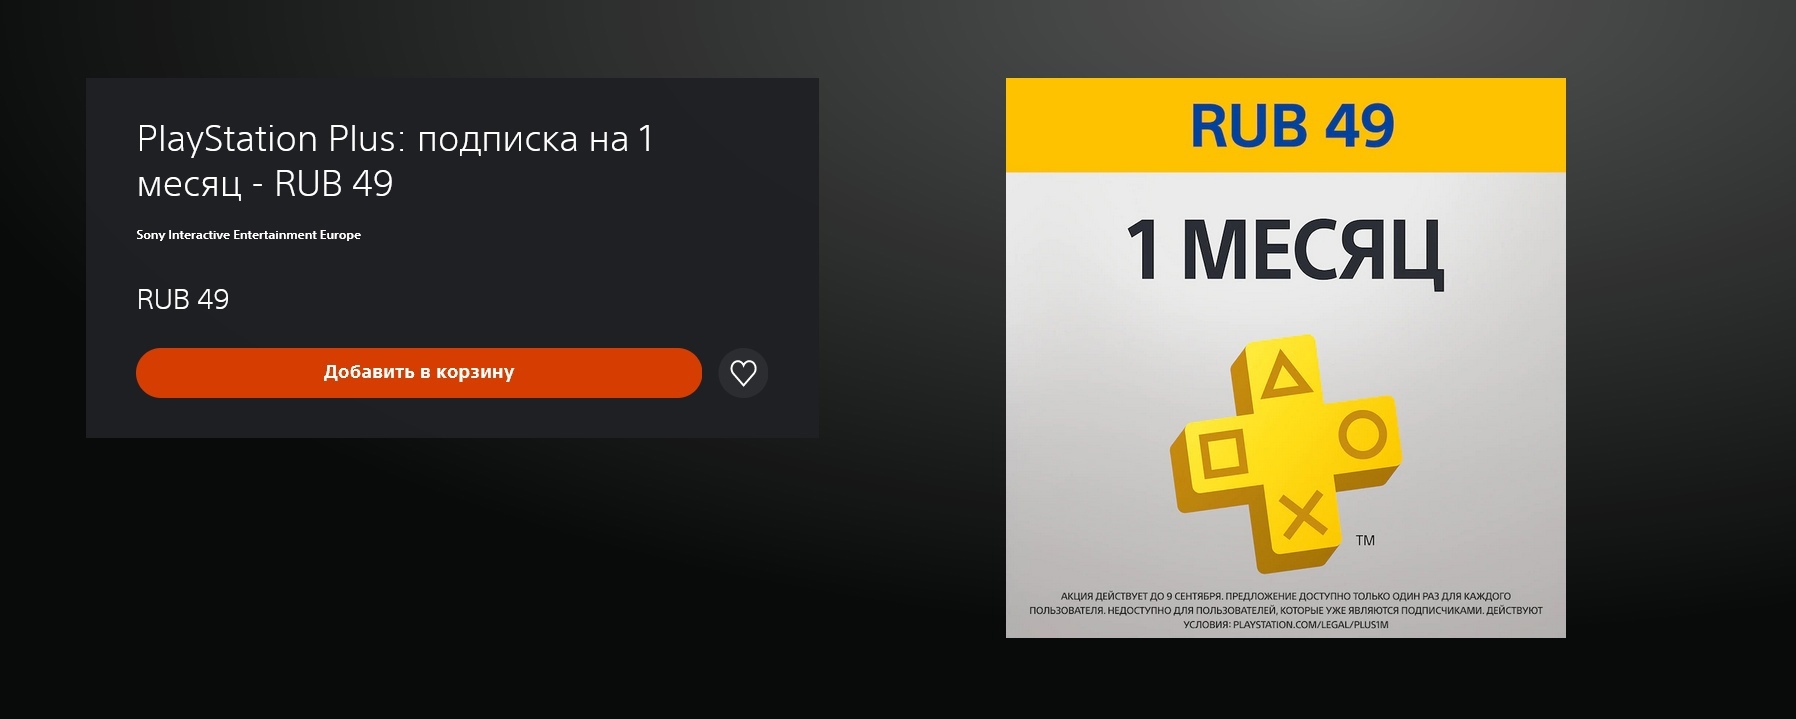 PlayStation Plus subscription 1 month for 49 rubles (only for those who do not have an active subscription!) - Playstation 4, Discounts, Not a freebie